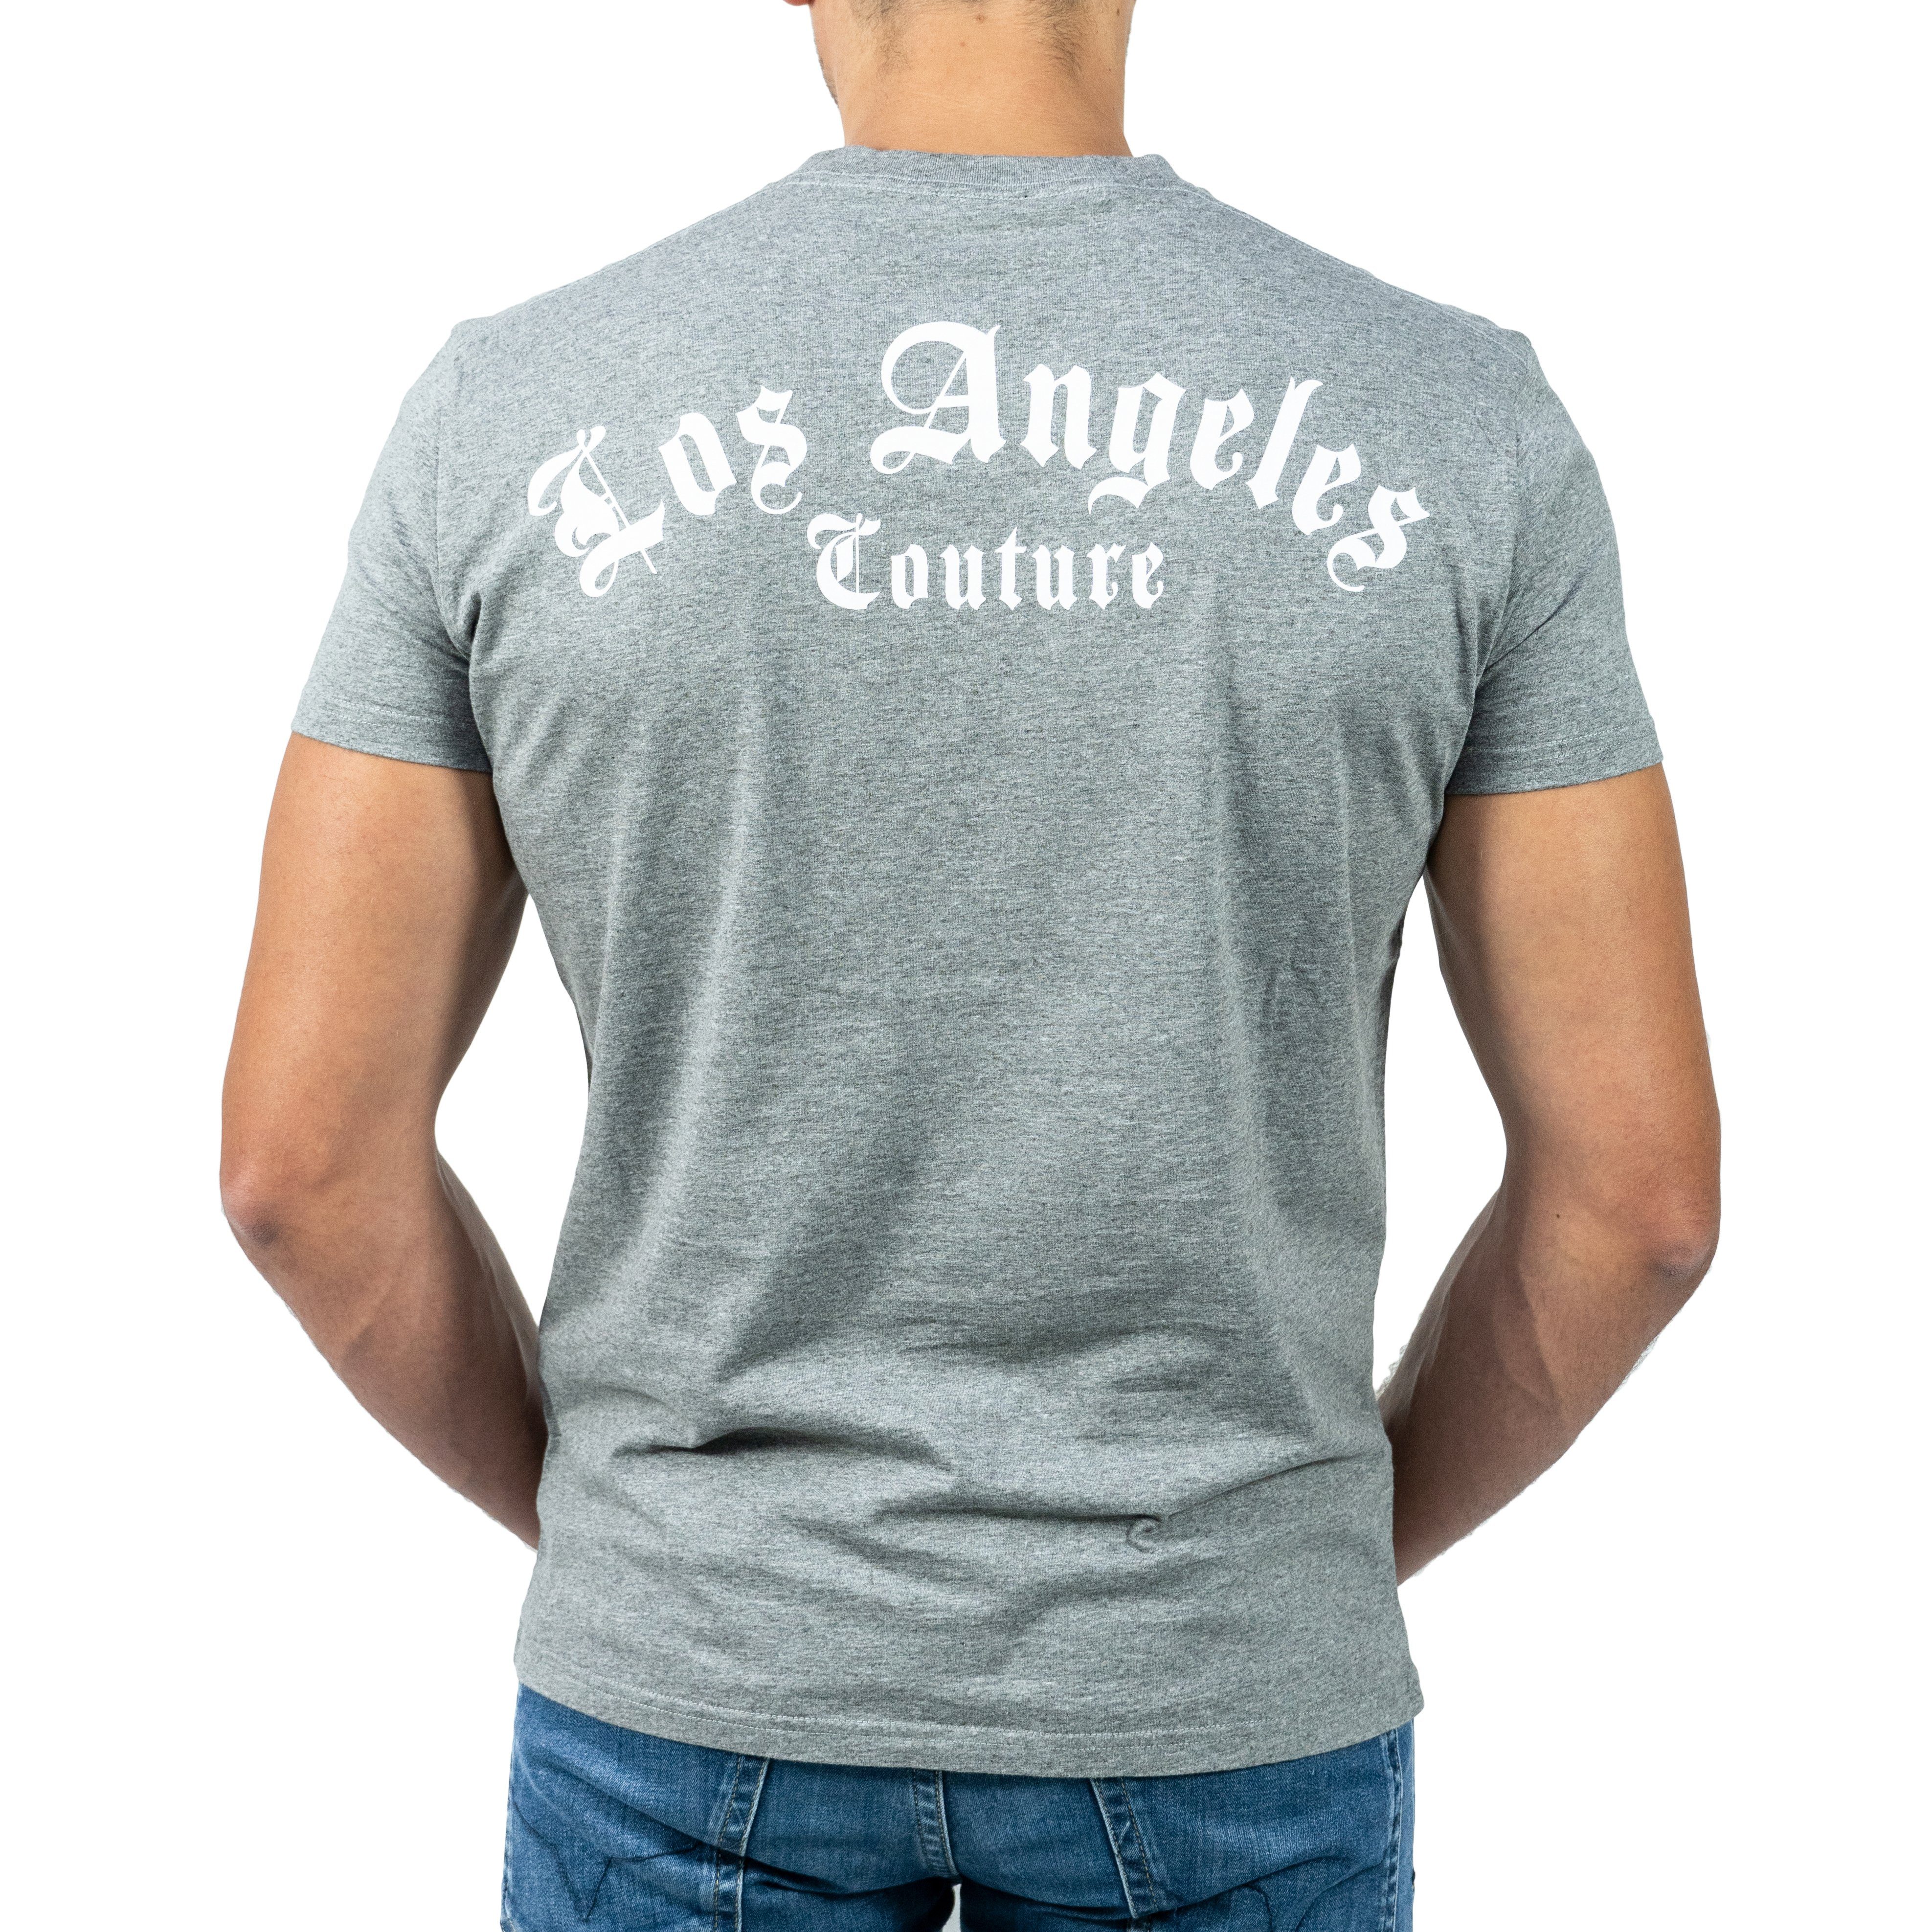 Chiccheria Brand T-Shirt Los Angeles Couture Designed in Los Angeles, Grau